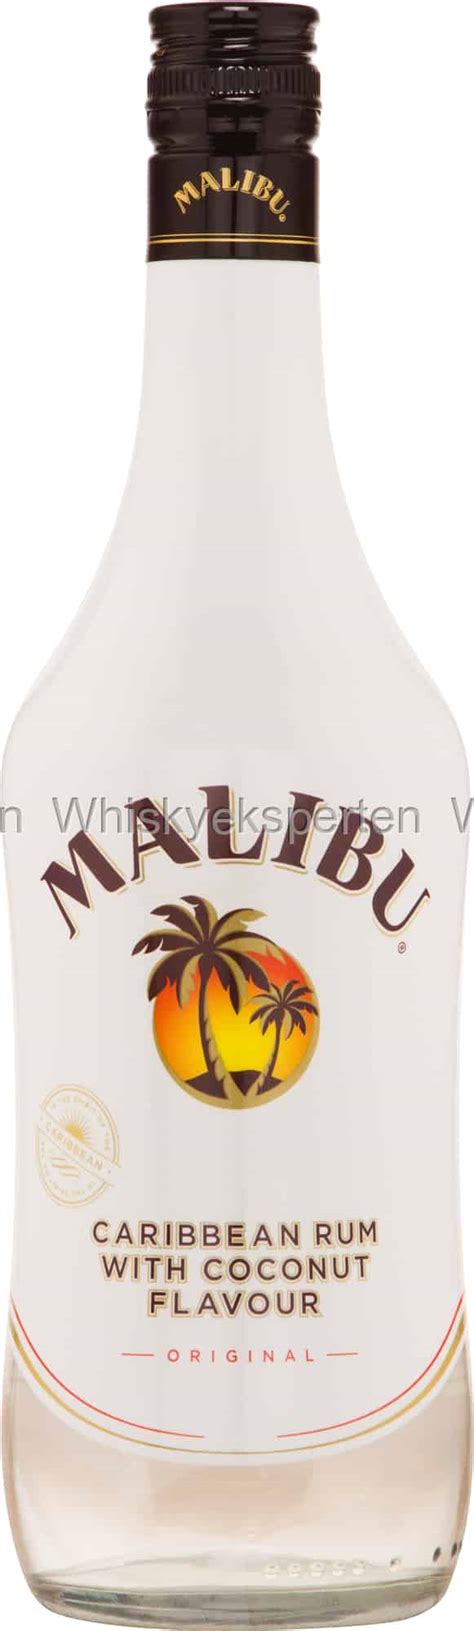 Drinker will have to constantly mix the drink in his glass as the advocaat will. Malibu | Caribbean Rum With Coconut Flavour